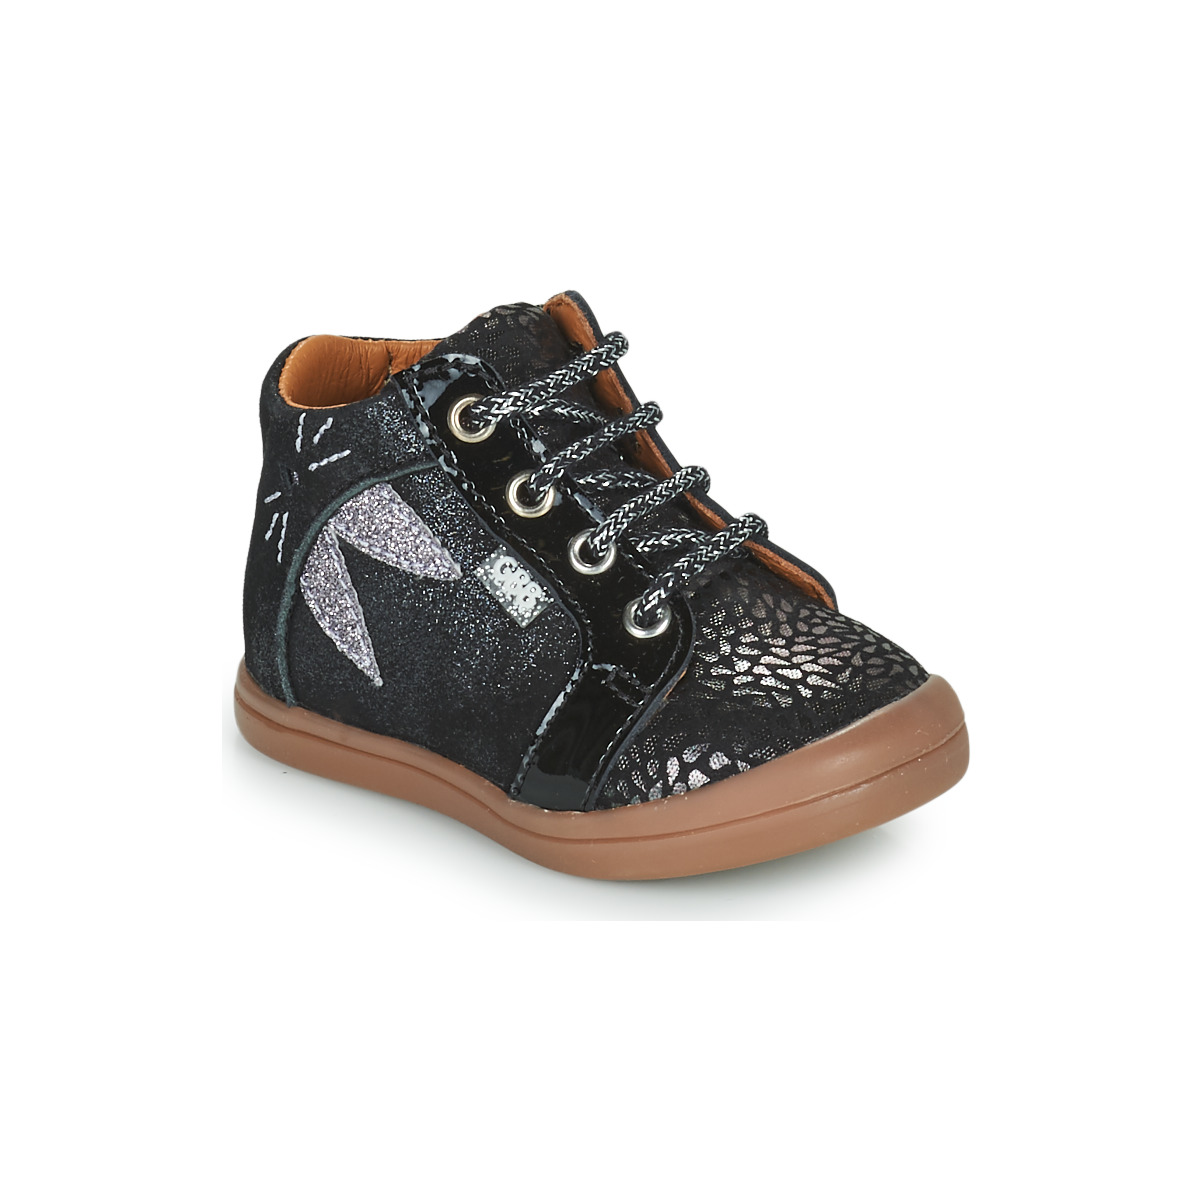 Shoes Girl High top trainers GBB CHOUGA Black